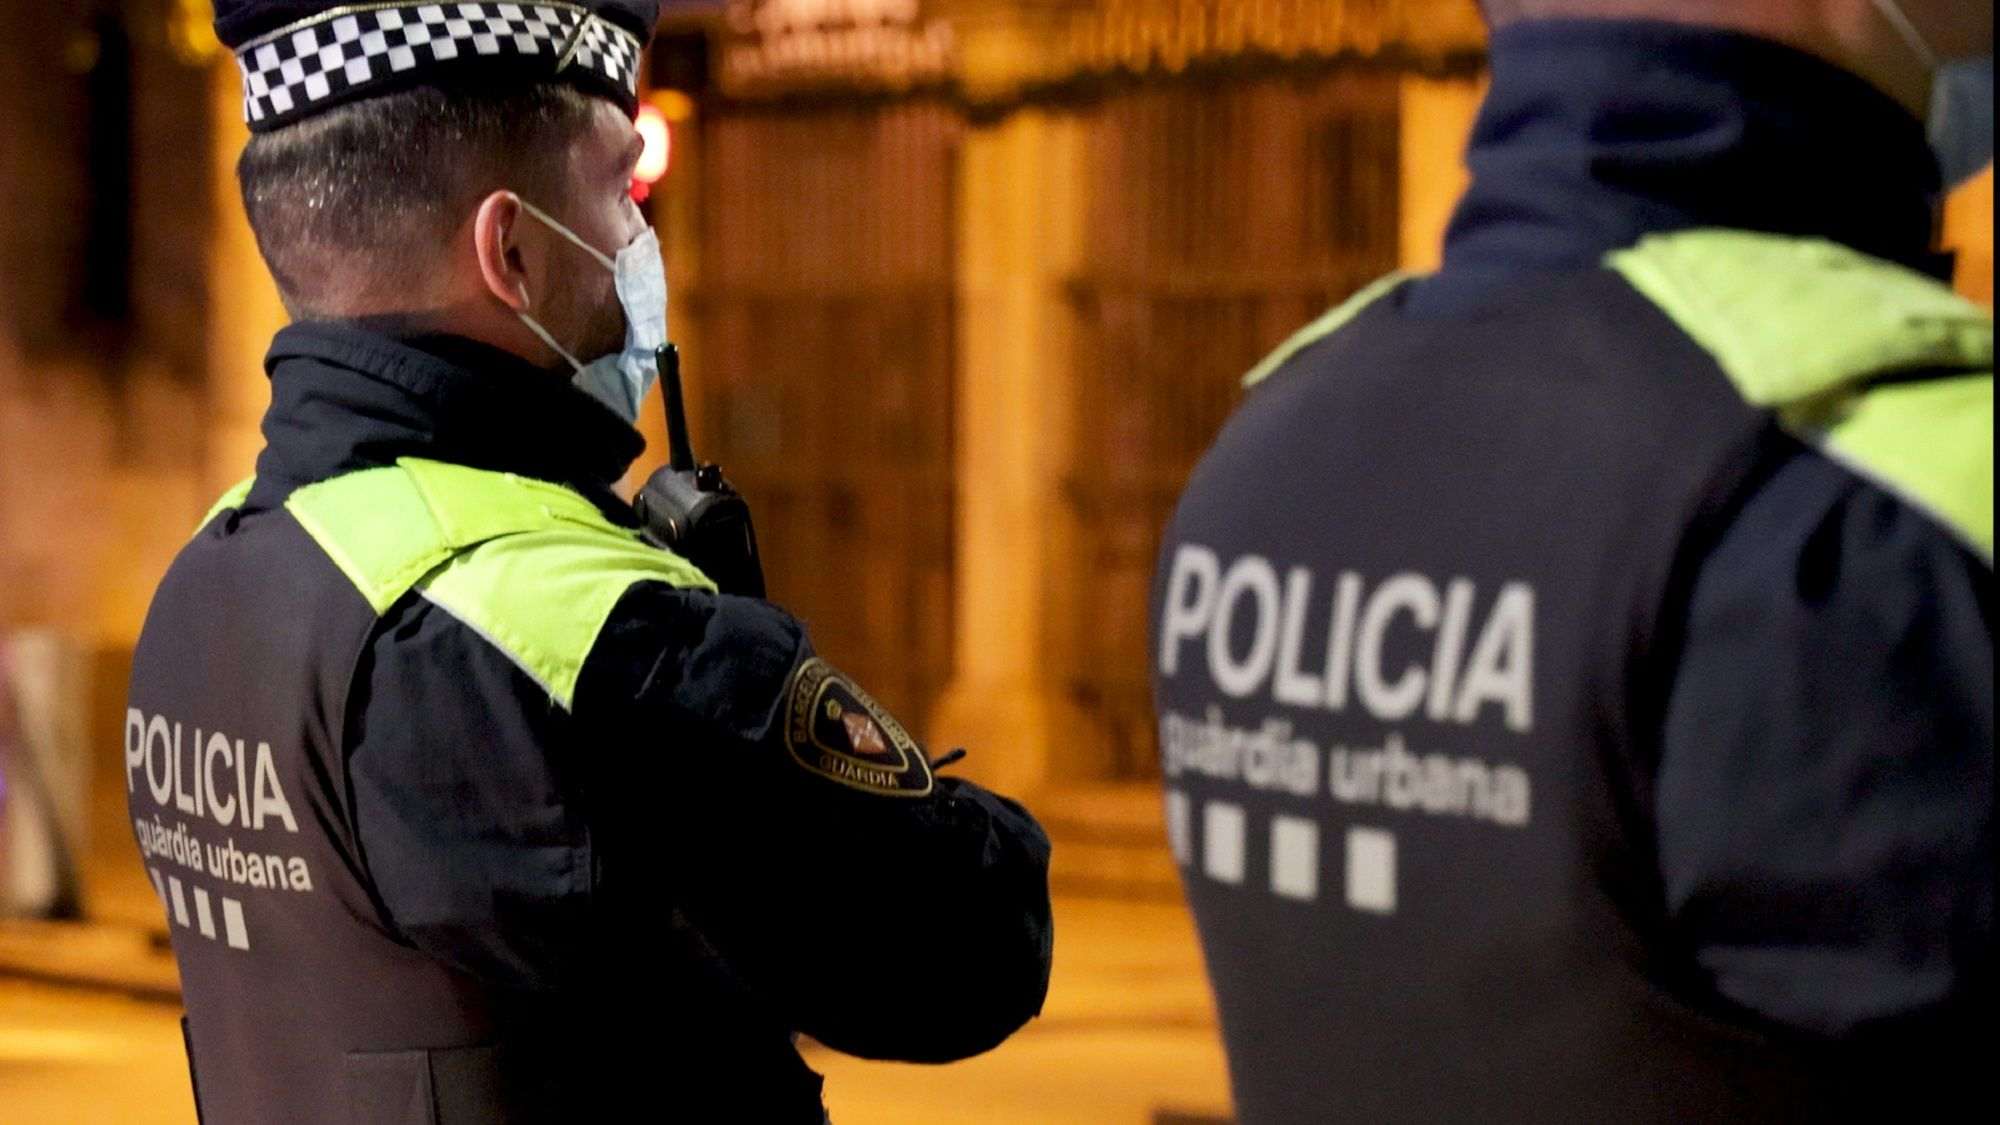 Barcelona, where it's unsafe to walk with a phone in your hand: city police warn of theft danger